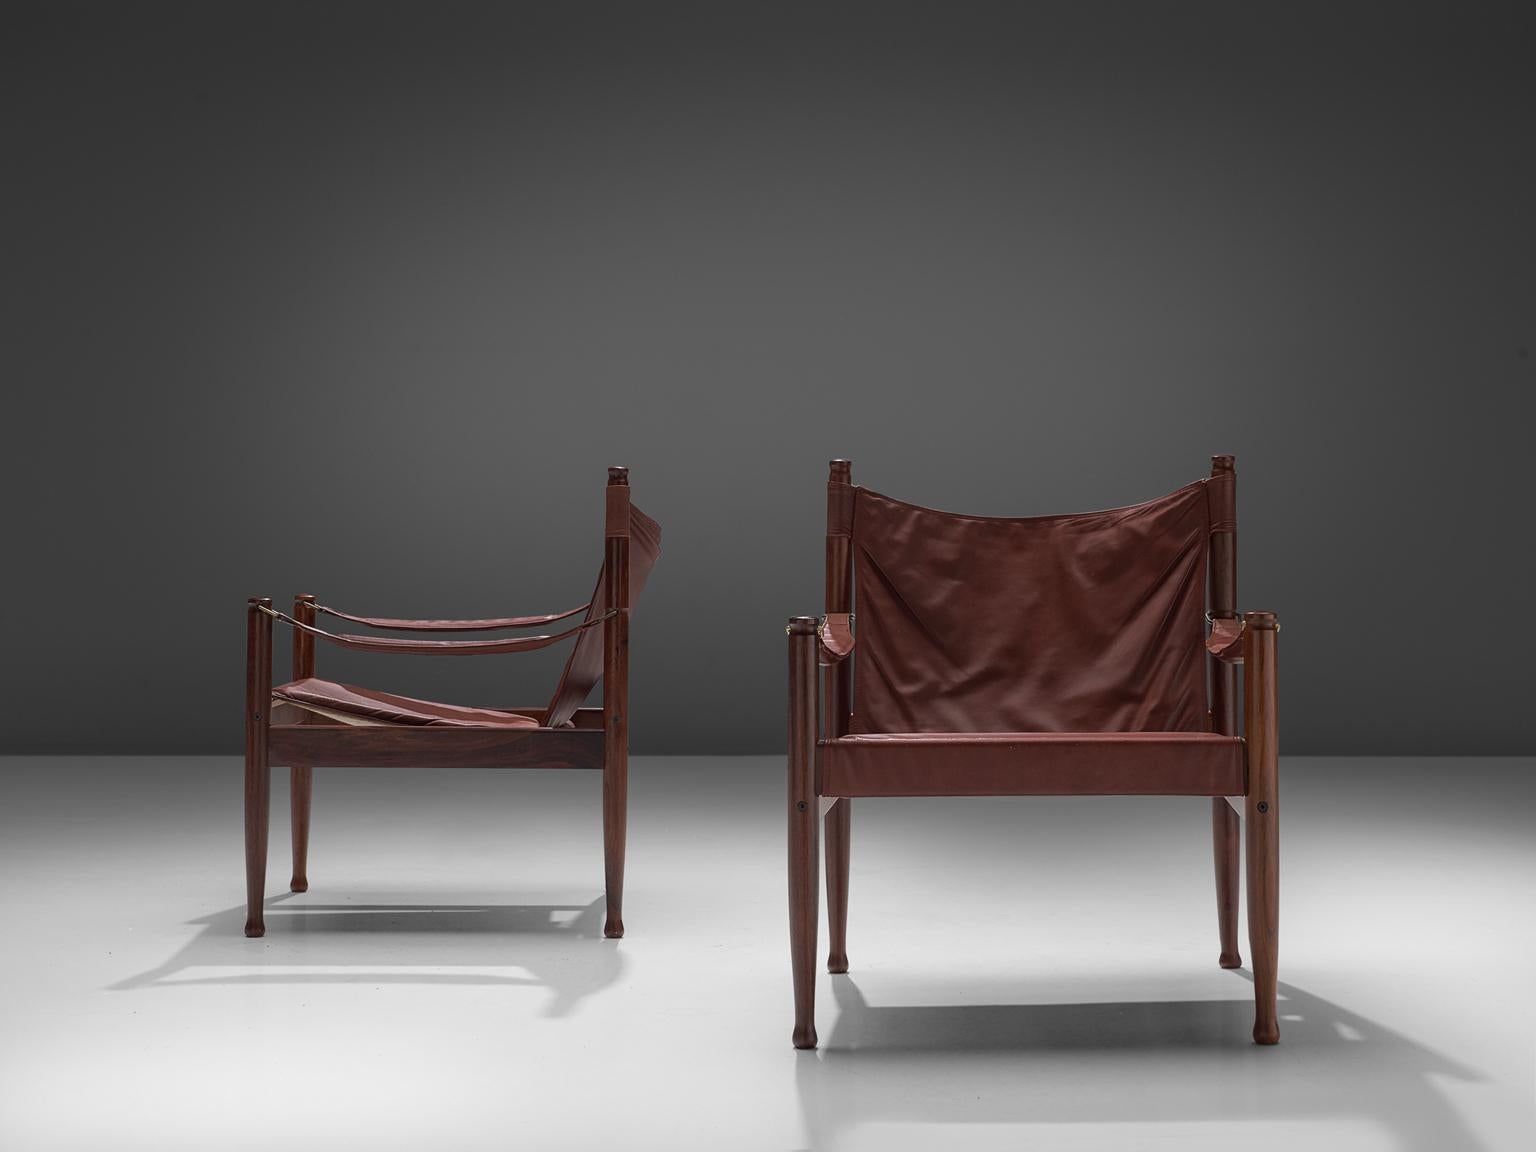 Erik Wørts for Niels Eilsersen, set of three armchairs, rosewood and leather, Denmark, 1960s. 

These sturdy lounge chairs with refined detail are designed by Danish designer Erik Wørts. The safari easy chairs have a strong expression due to the